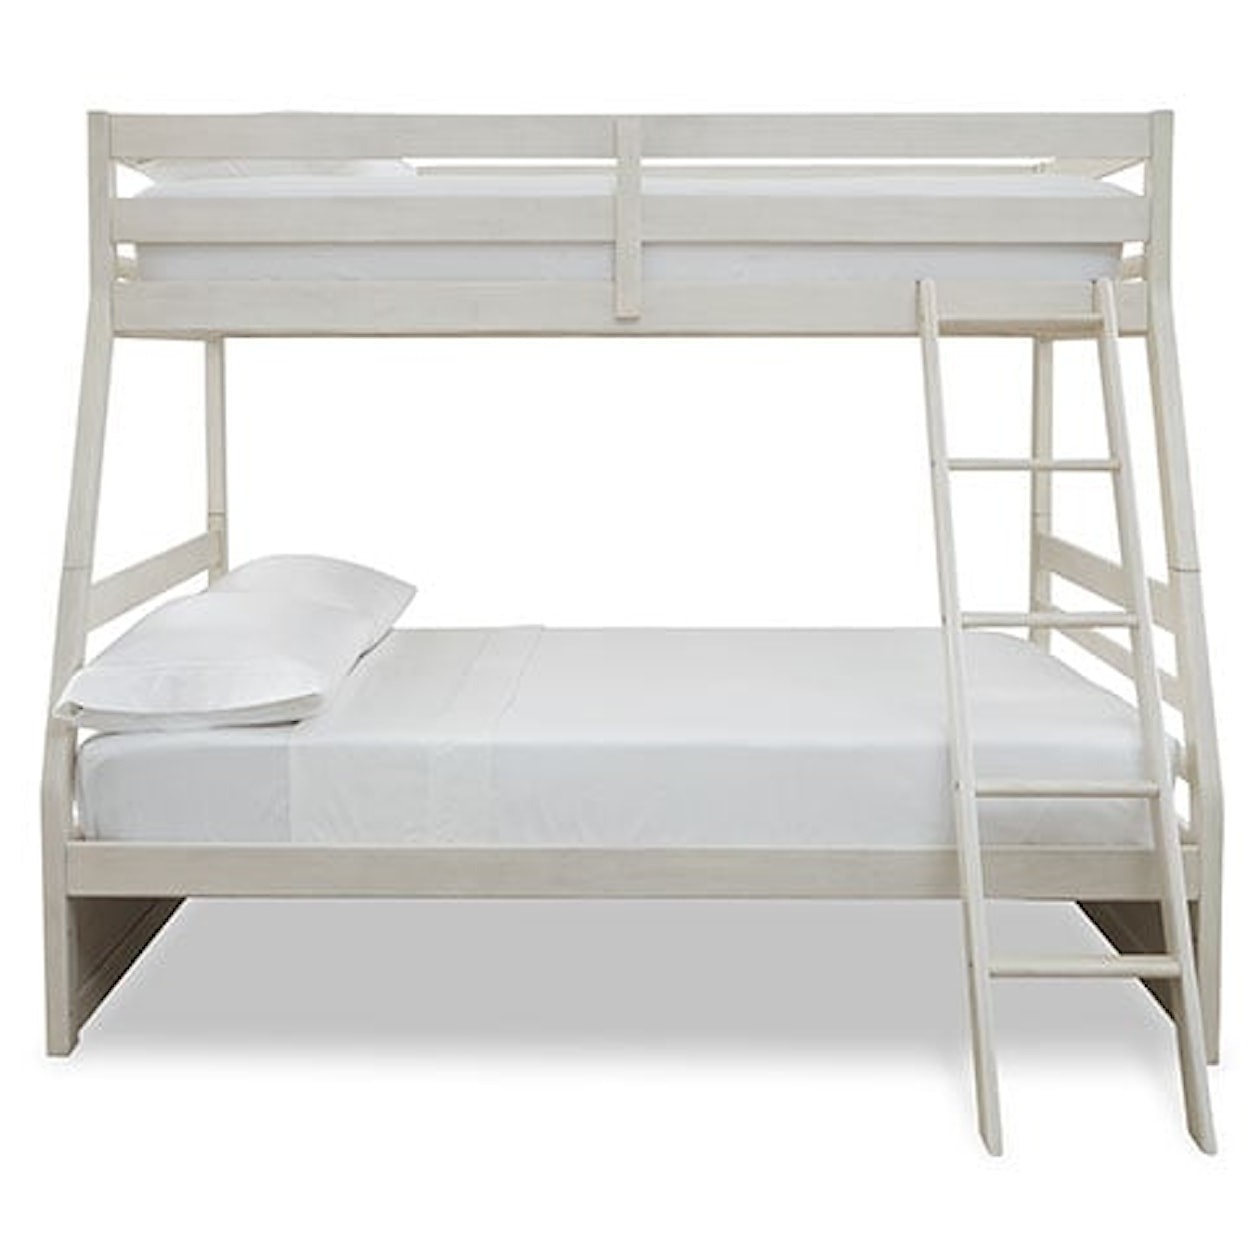 Signature Design Robbinsdale Twin/Full Bunk Bed